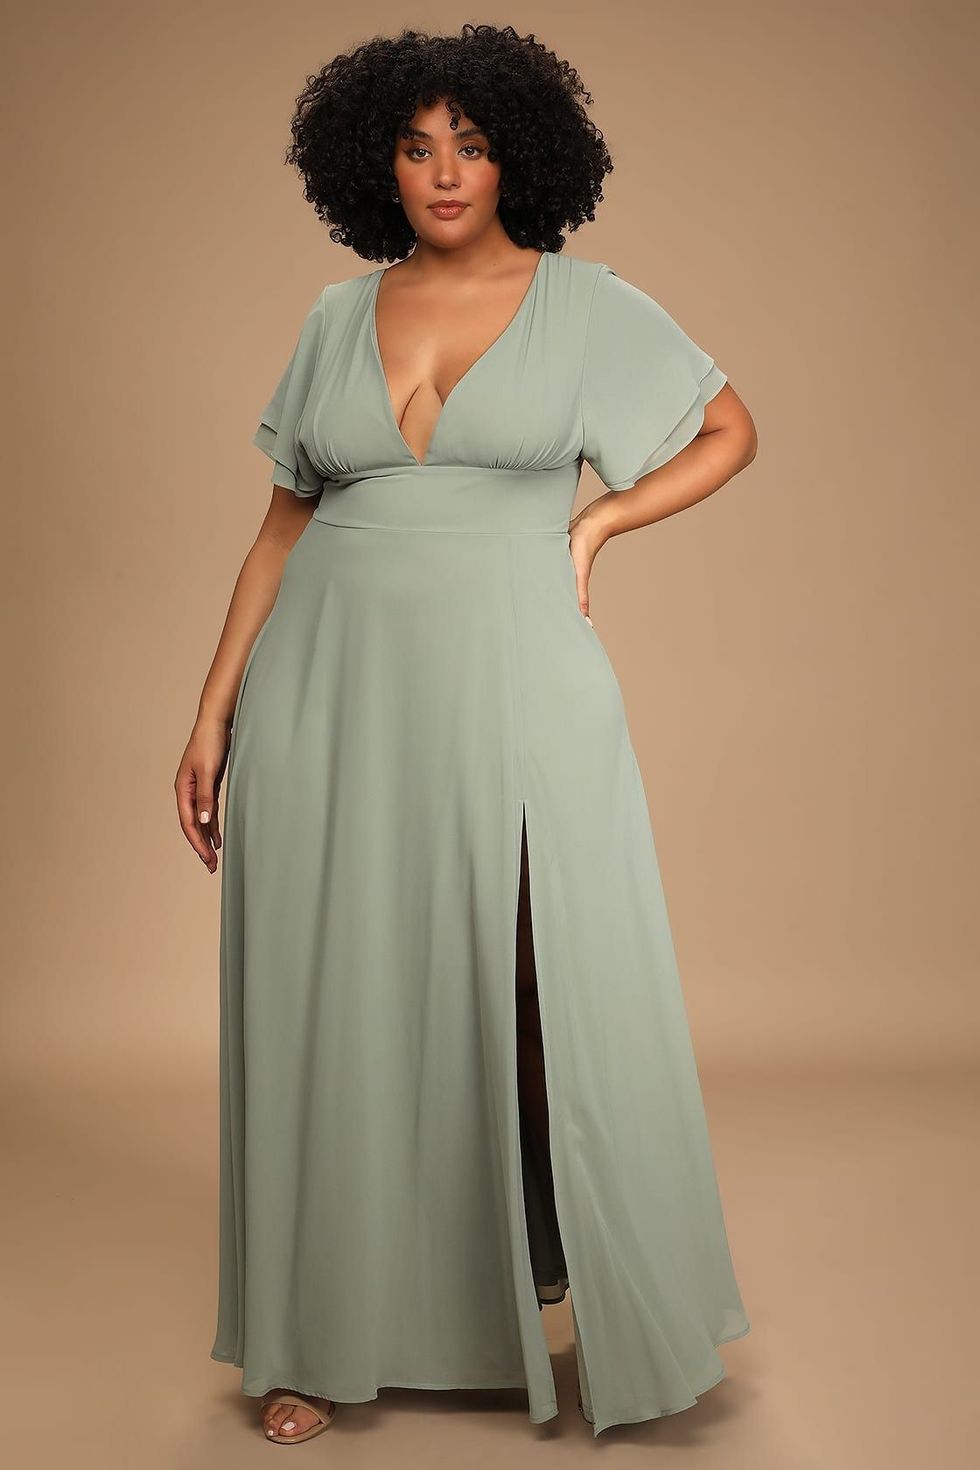 Plus Size Slips For Dresses  Chic Lover - Plus Size Clothing